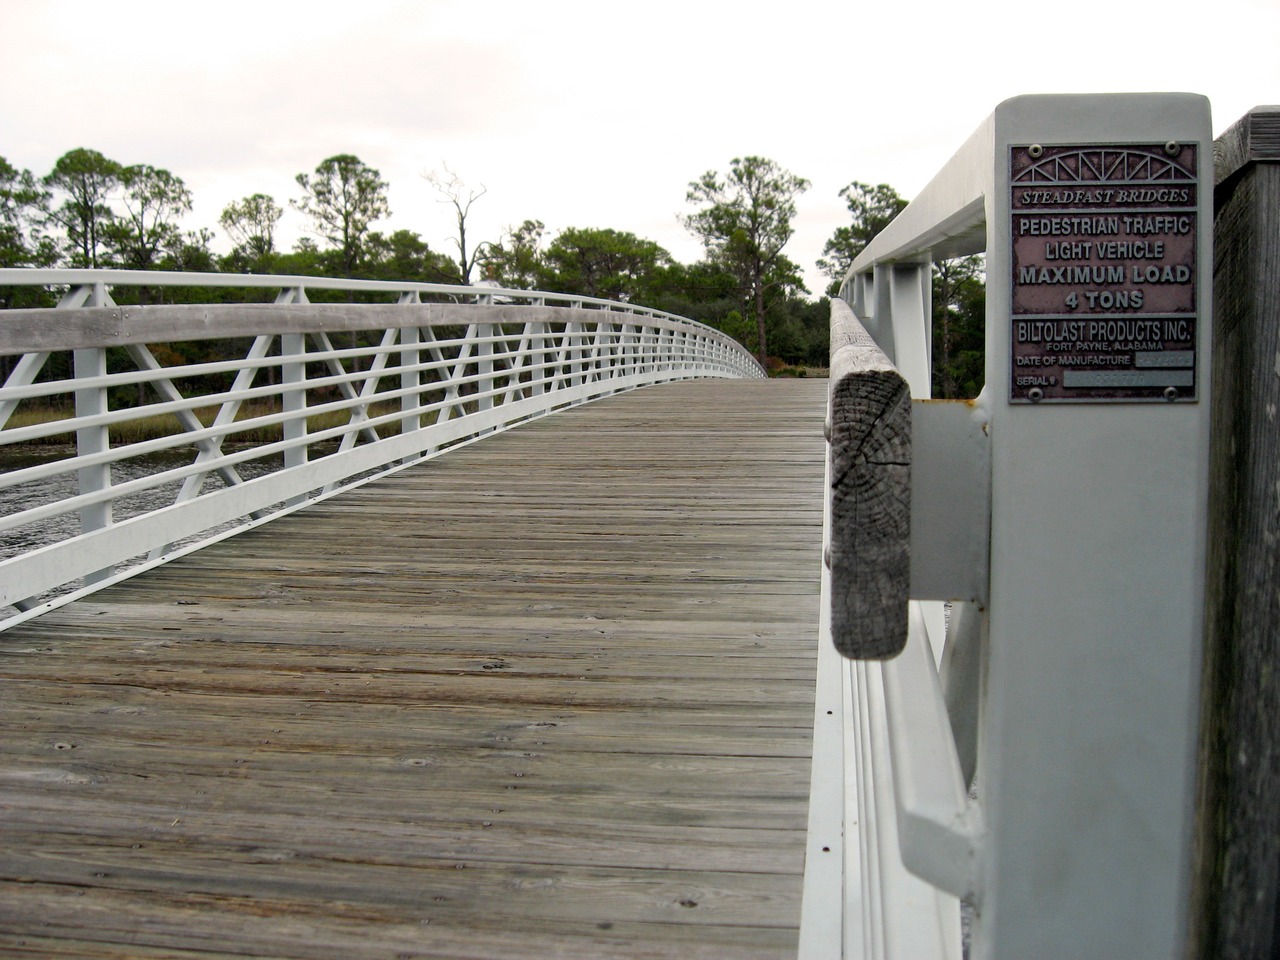 Information plaque on Steadfast 4-Ton Pedestrian/Light Vehicle Bridge 031770 (2003) connecting Marina Park and Cerulean Park North over Western Lake.